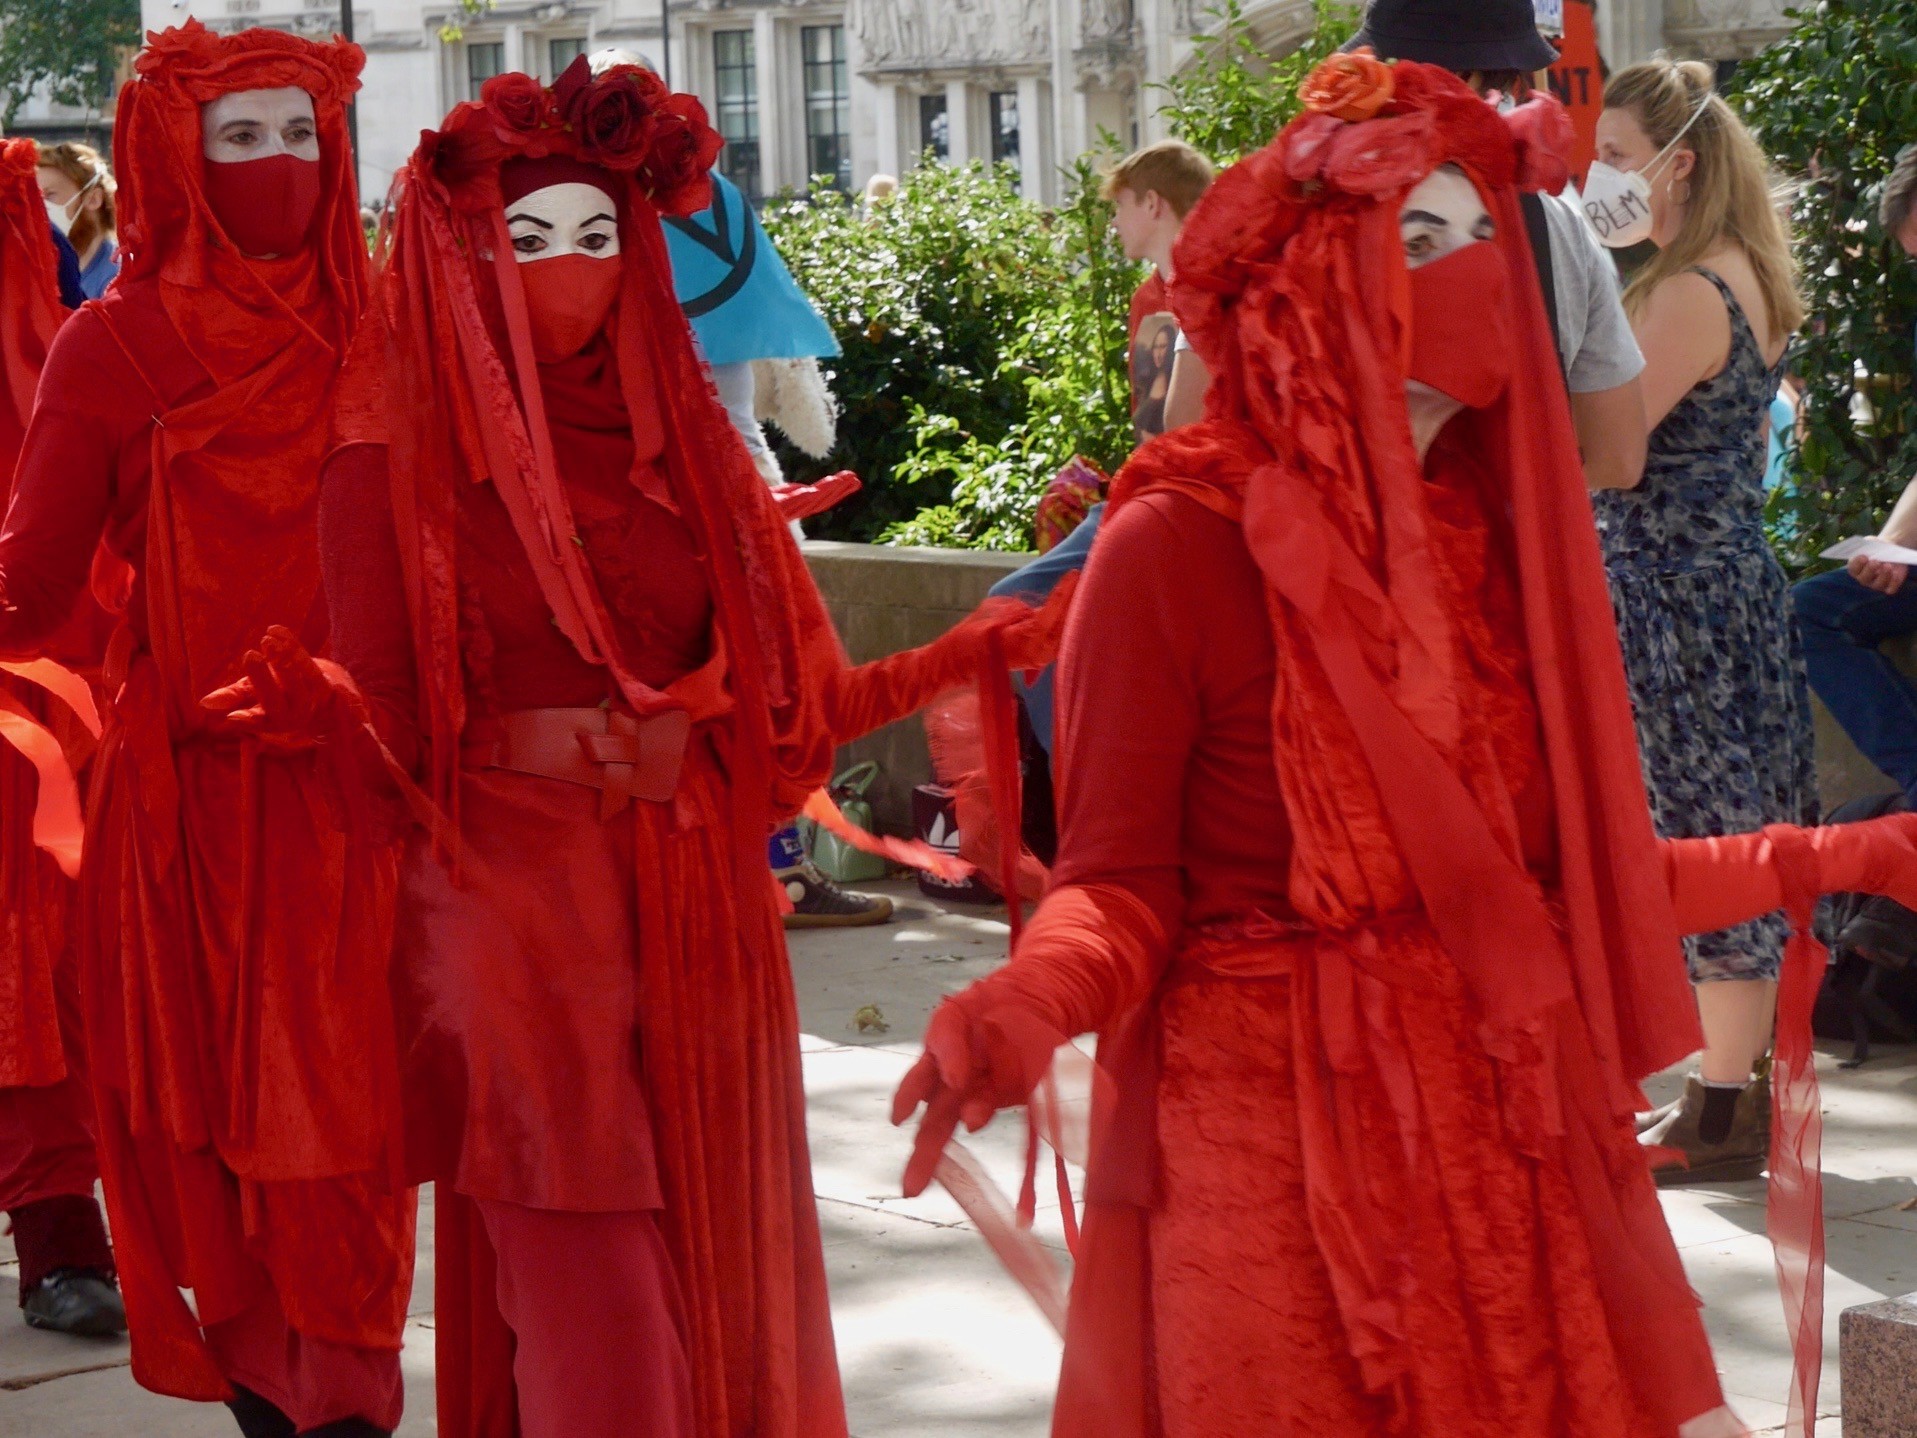 Members of the Red Rebellion Brigade march in Parliament Square, London on September 1st, 2020. Kurt Zindulka, Breitbart News